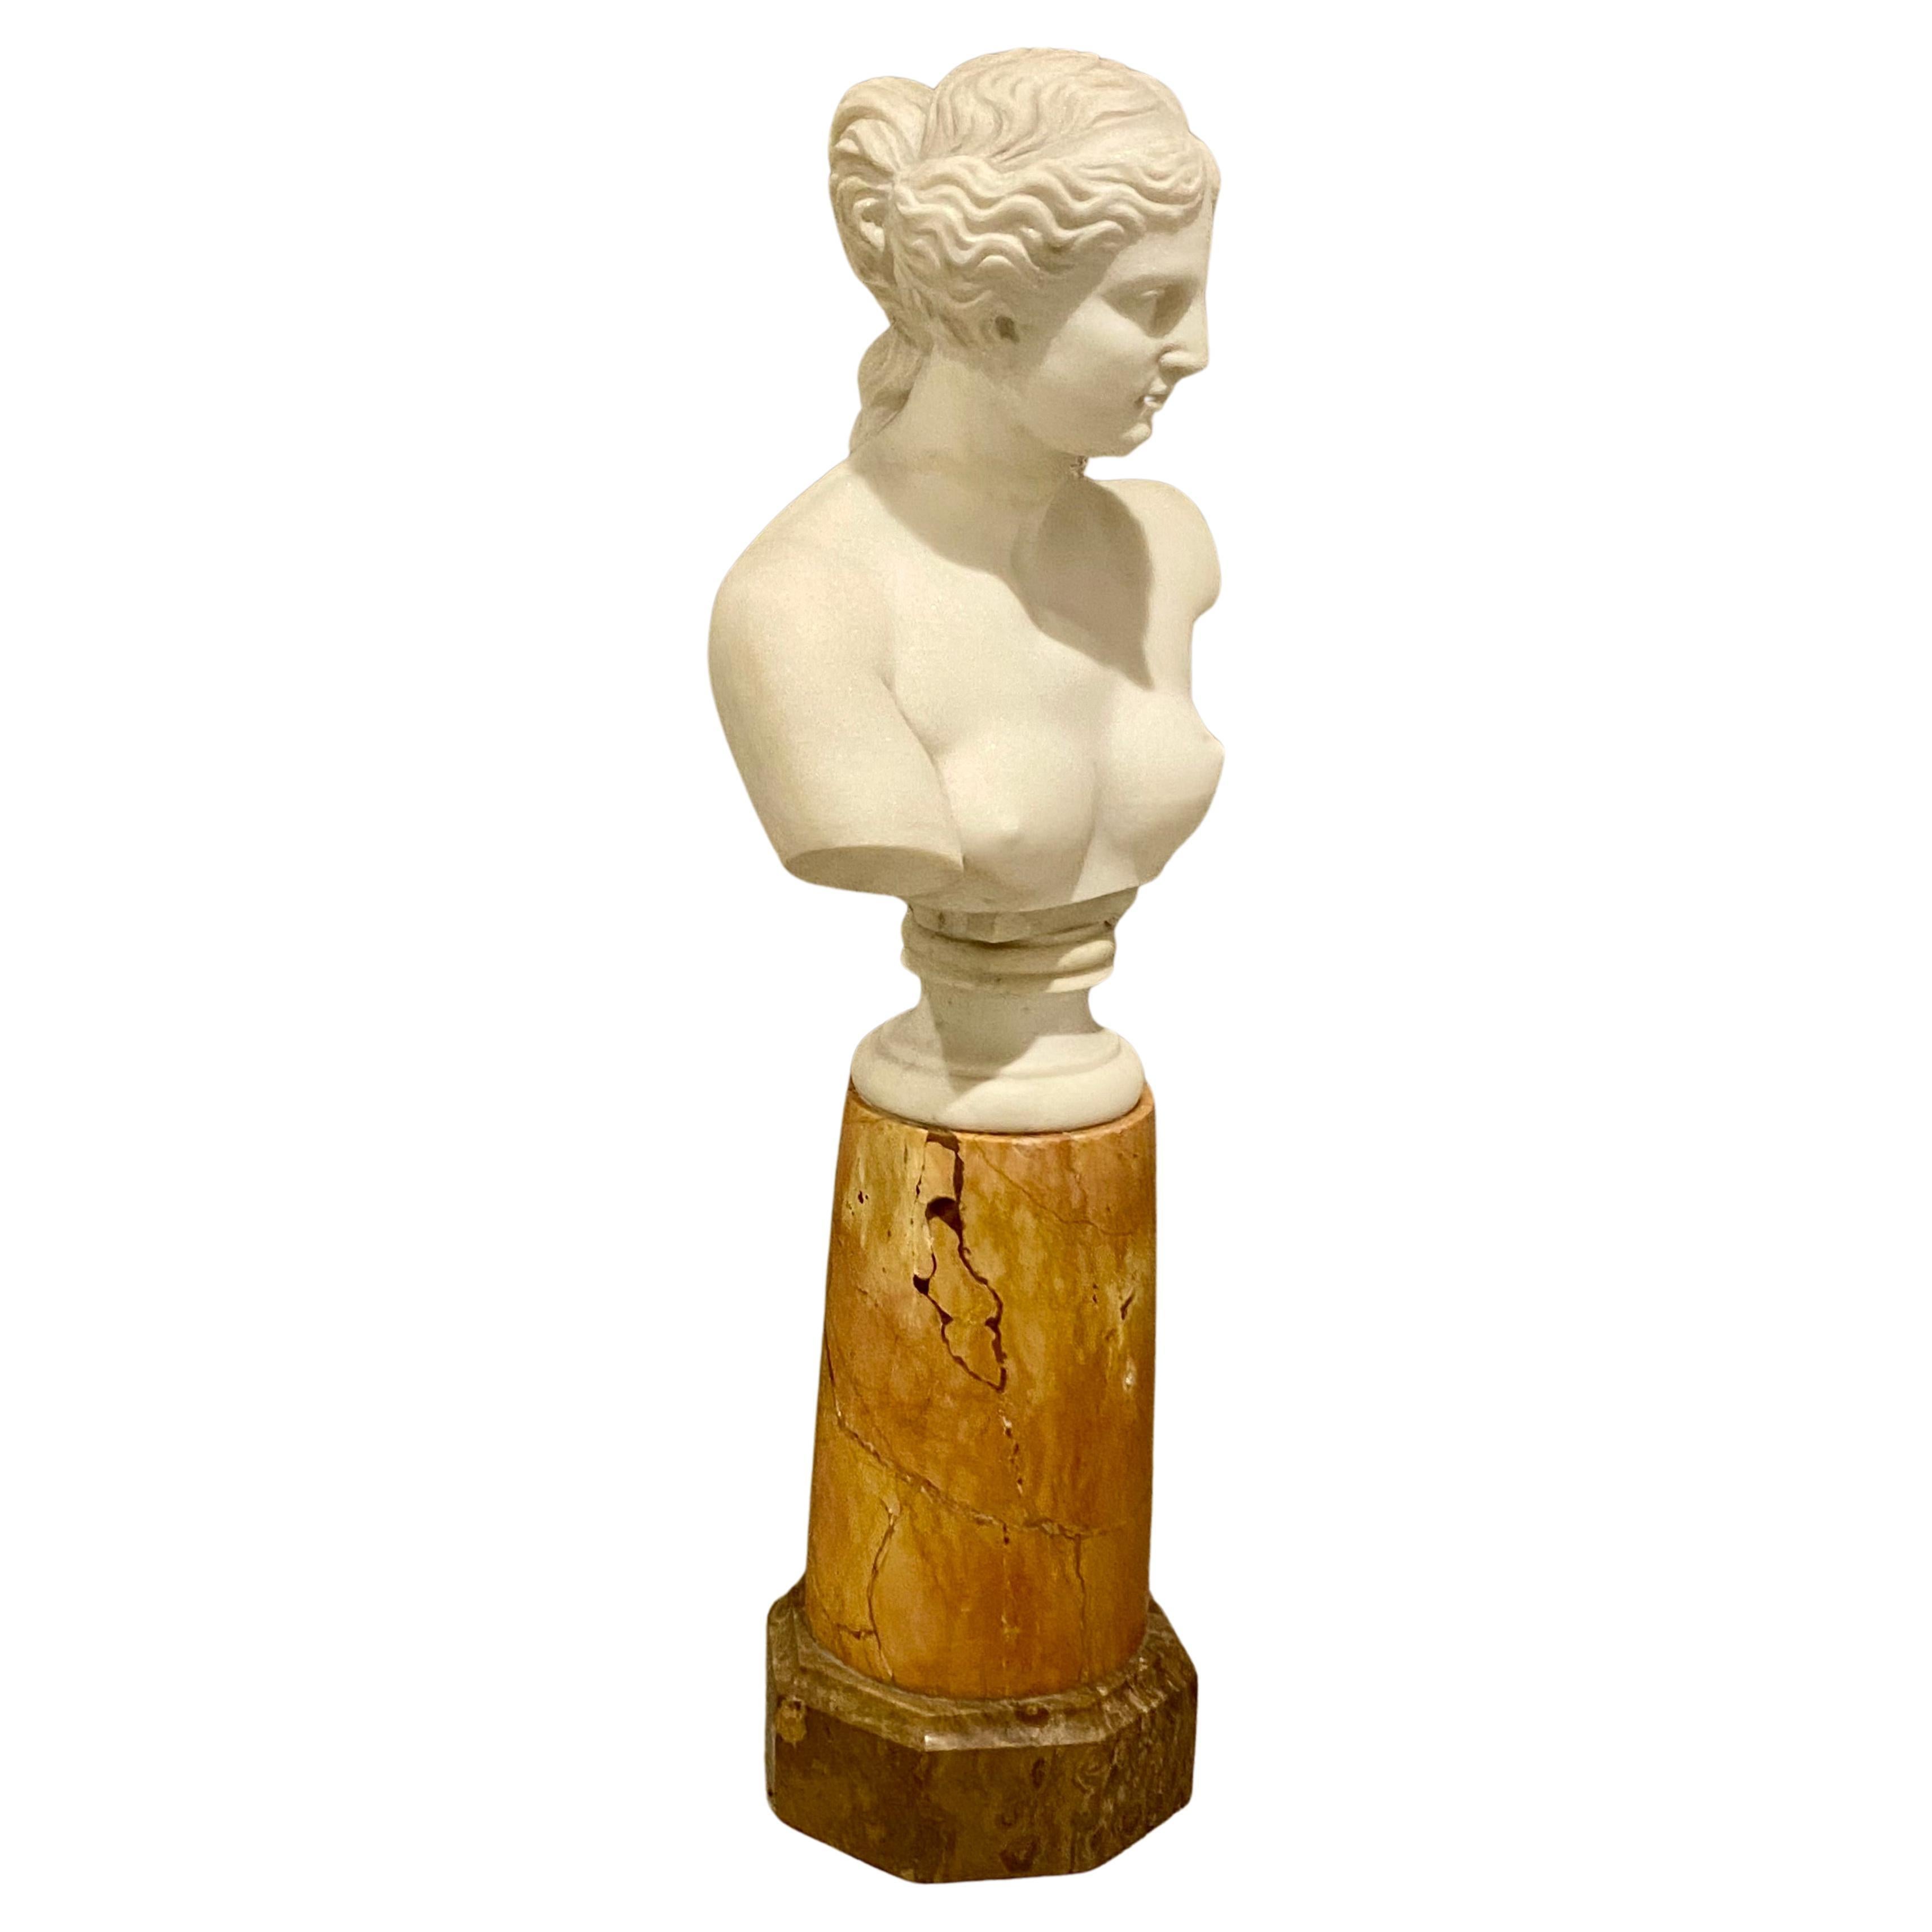 A High quality 19th Century Bust of the Venus de Milo.
This is carved in solid marble.
A superb Portrait of a Venus in marble placed on a rouge marble column on a Brown octagonal Marble base. This was made in Italy around 1880 and looks amazing with